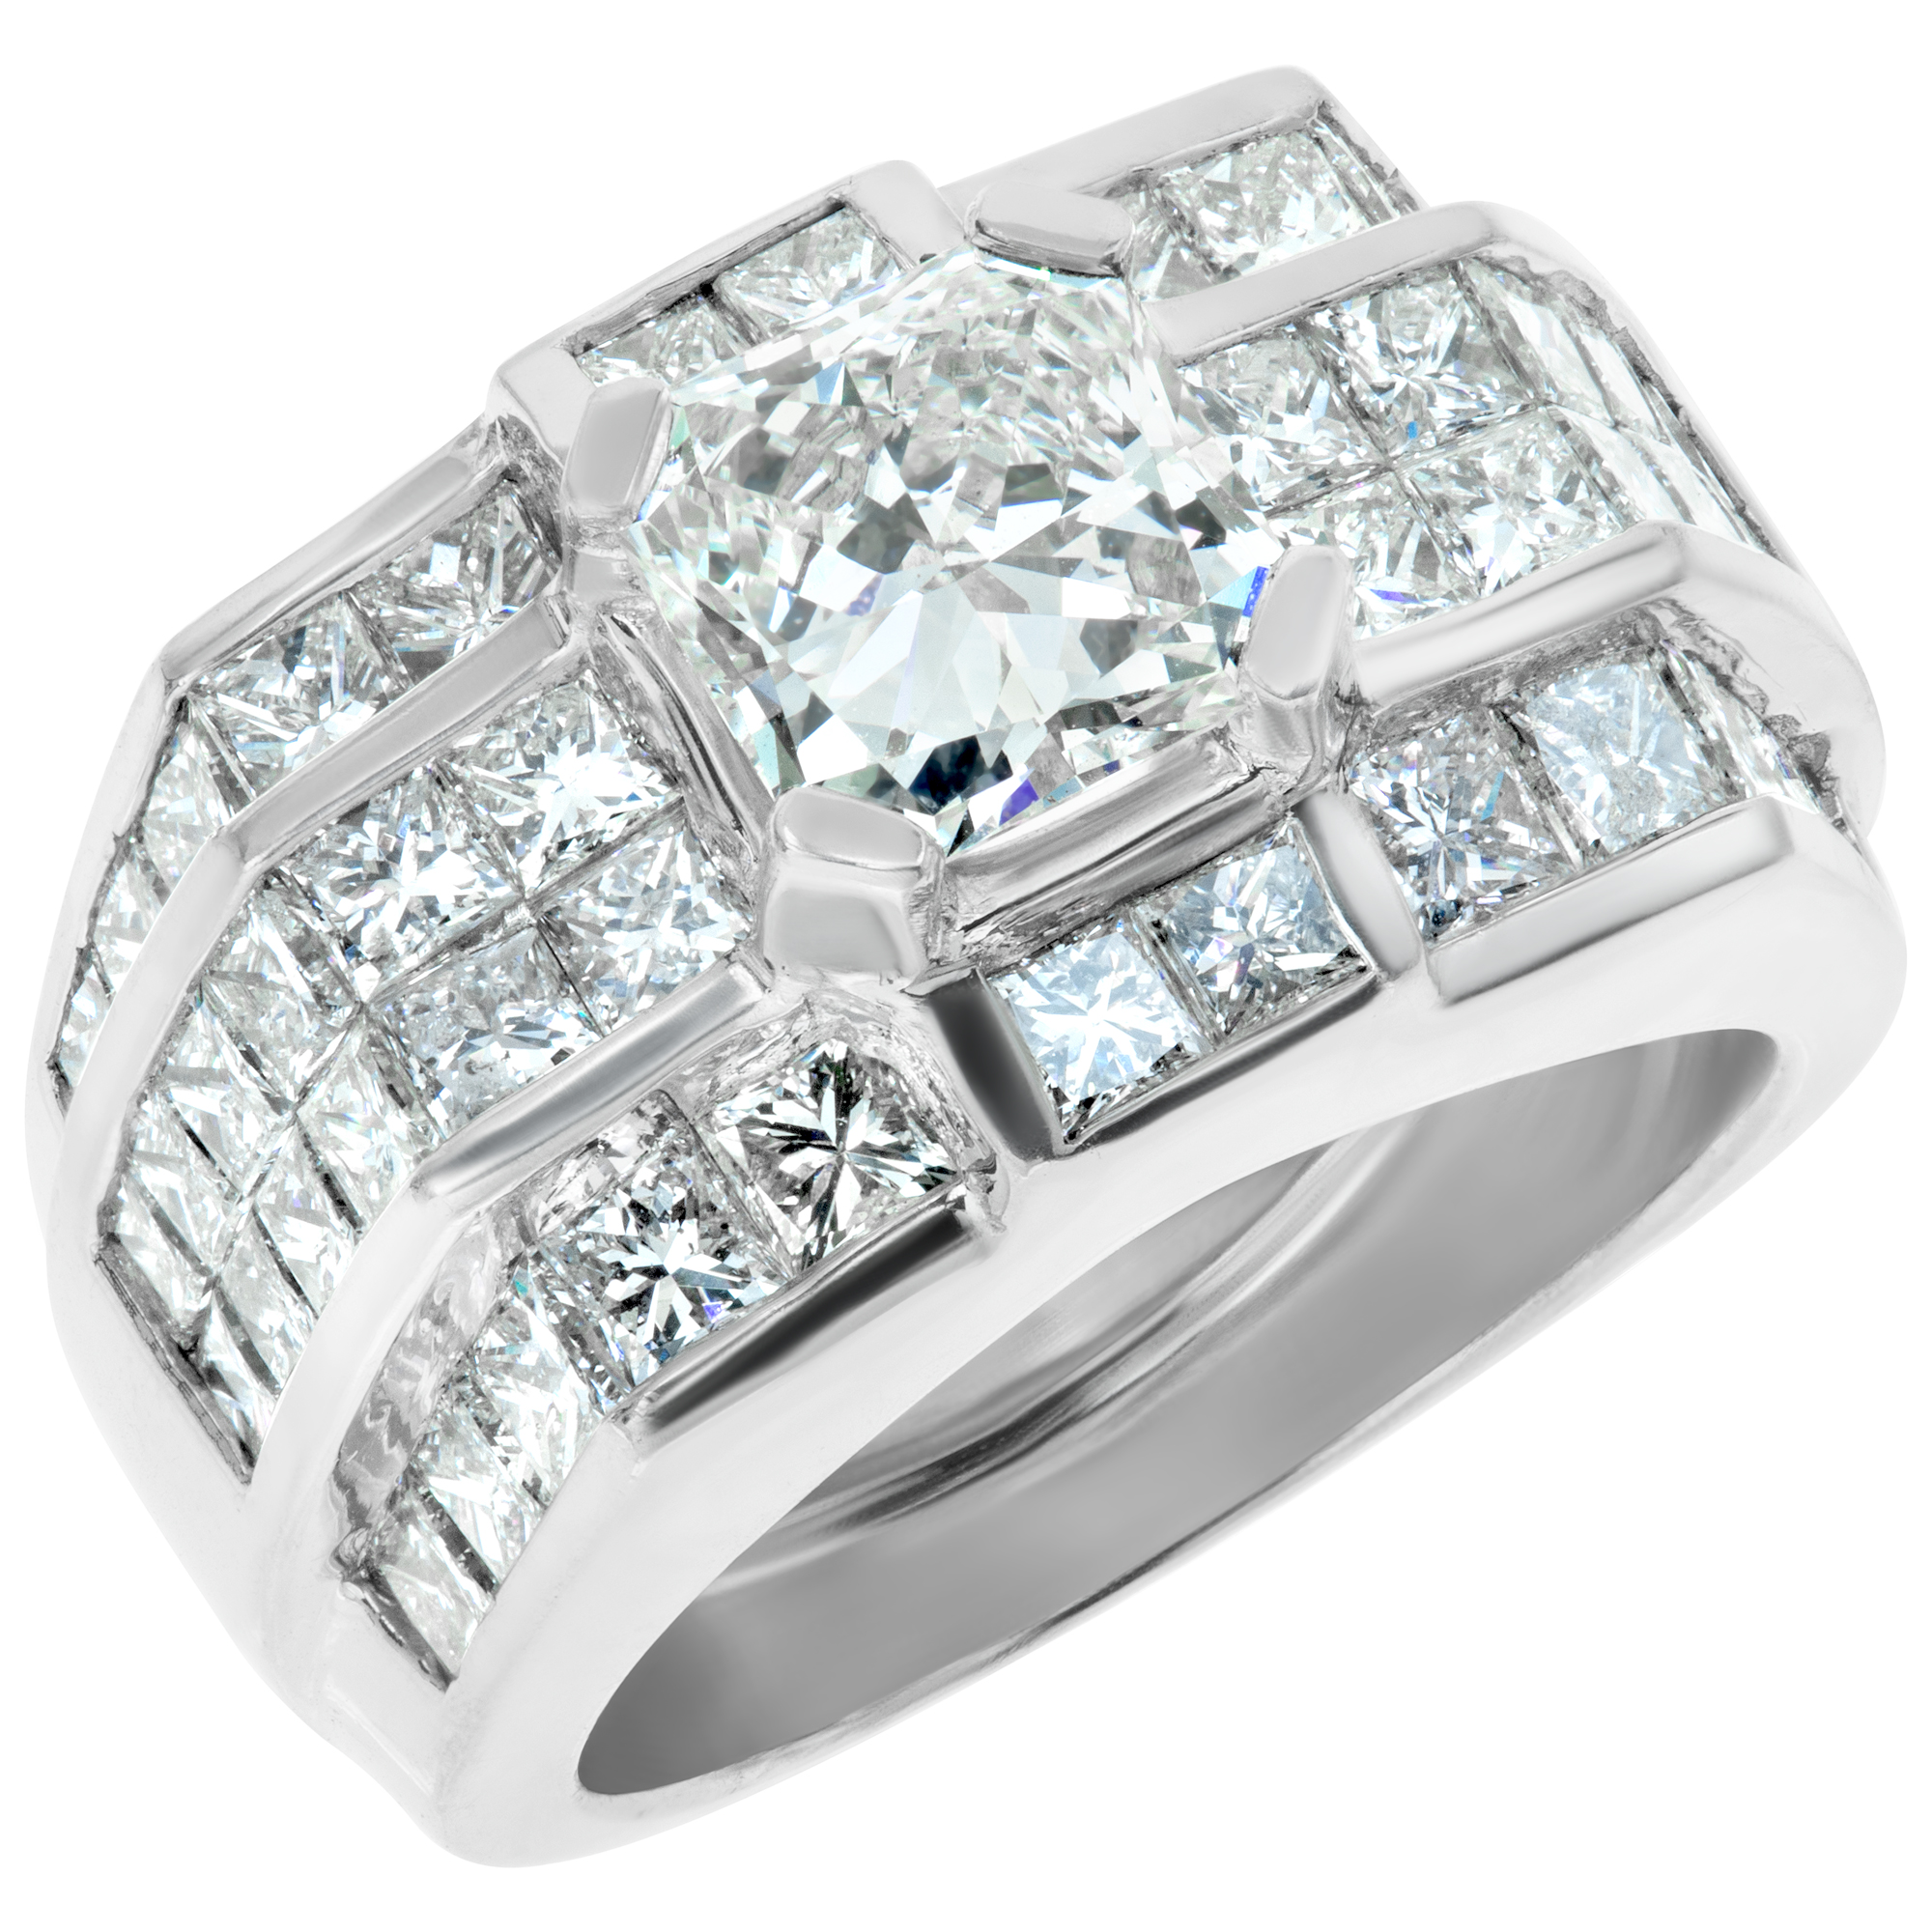 Gia Certified 2.22 Carats Round  Brilliant Diamond,  J Color Vs2 Clarity Set In Heavy Platinum Ring With 4 Rows Invisible Set  Princess Cut Diamonds, Total  Approx. Weight: 4.60 Carats image 3